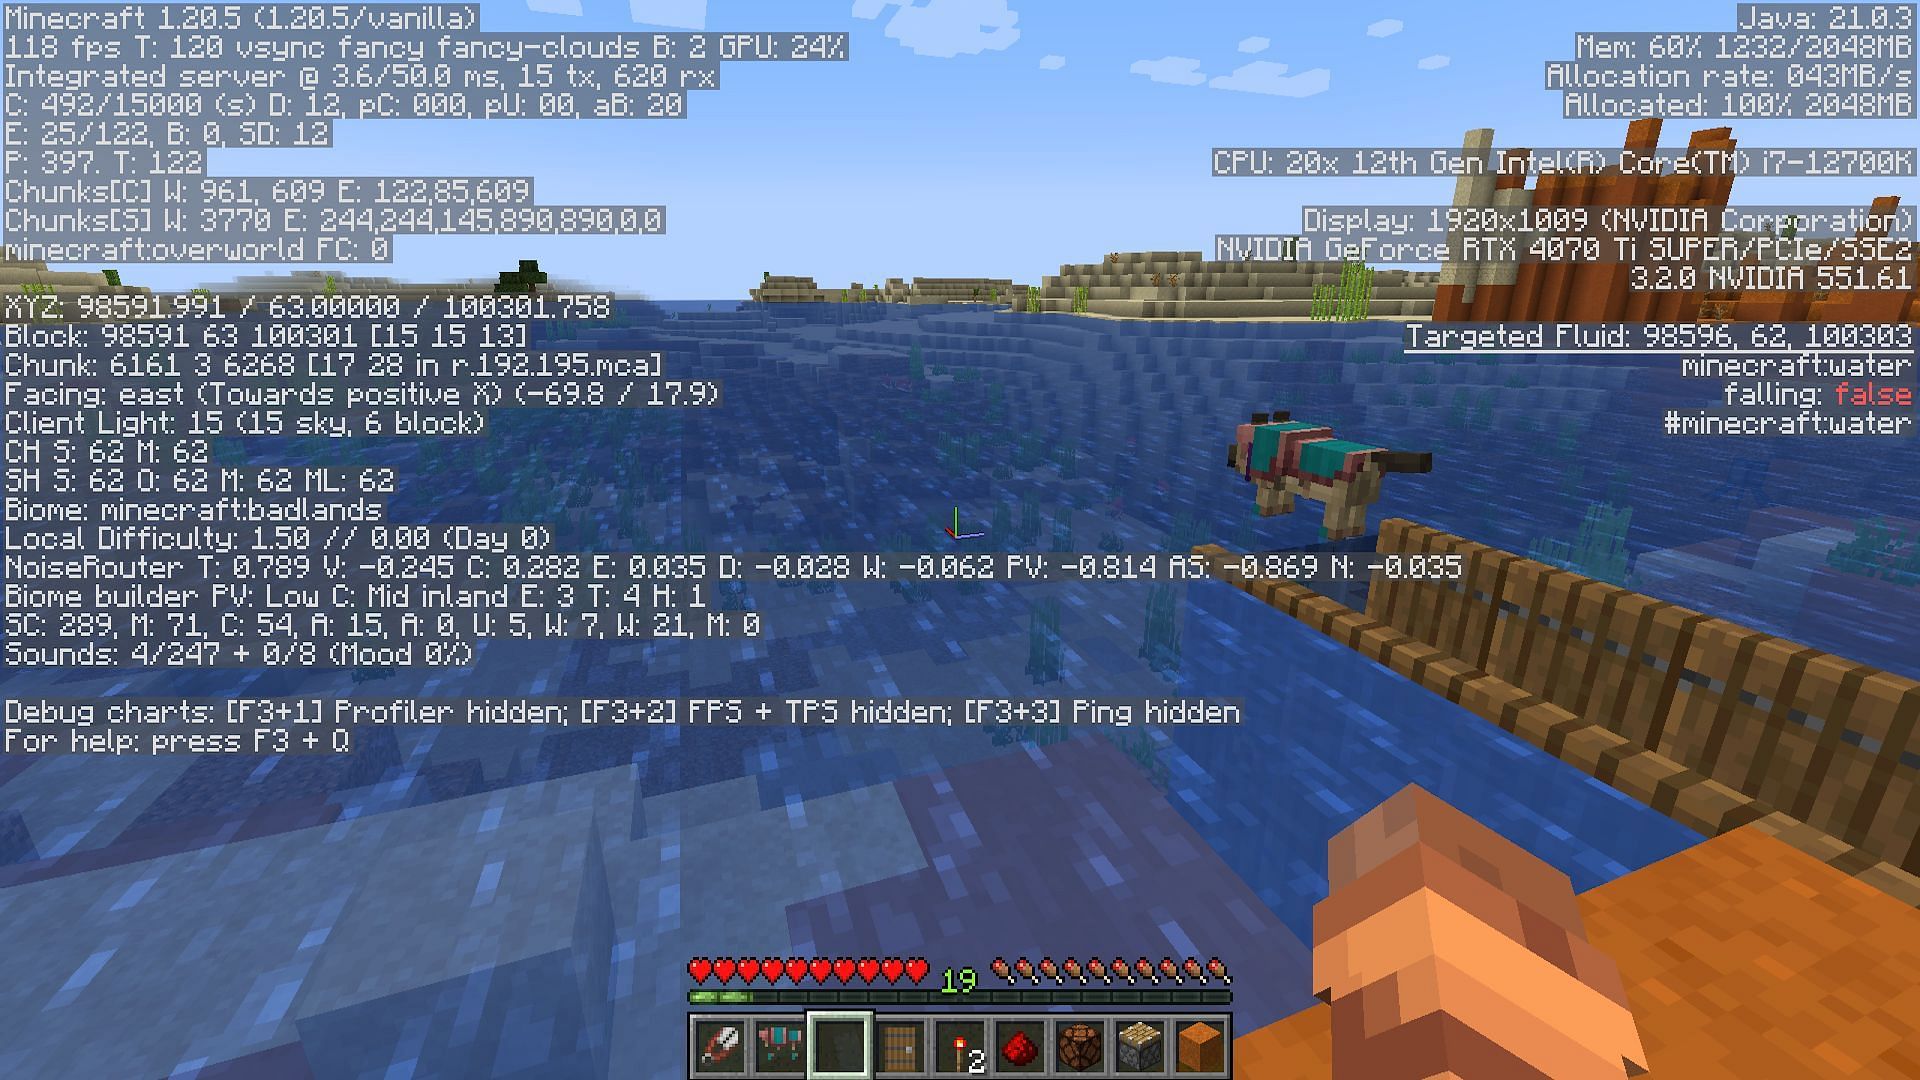 The F3 screen information is oftentimes invaluable to technical players (Image via Mojang)